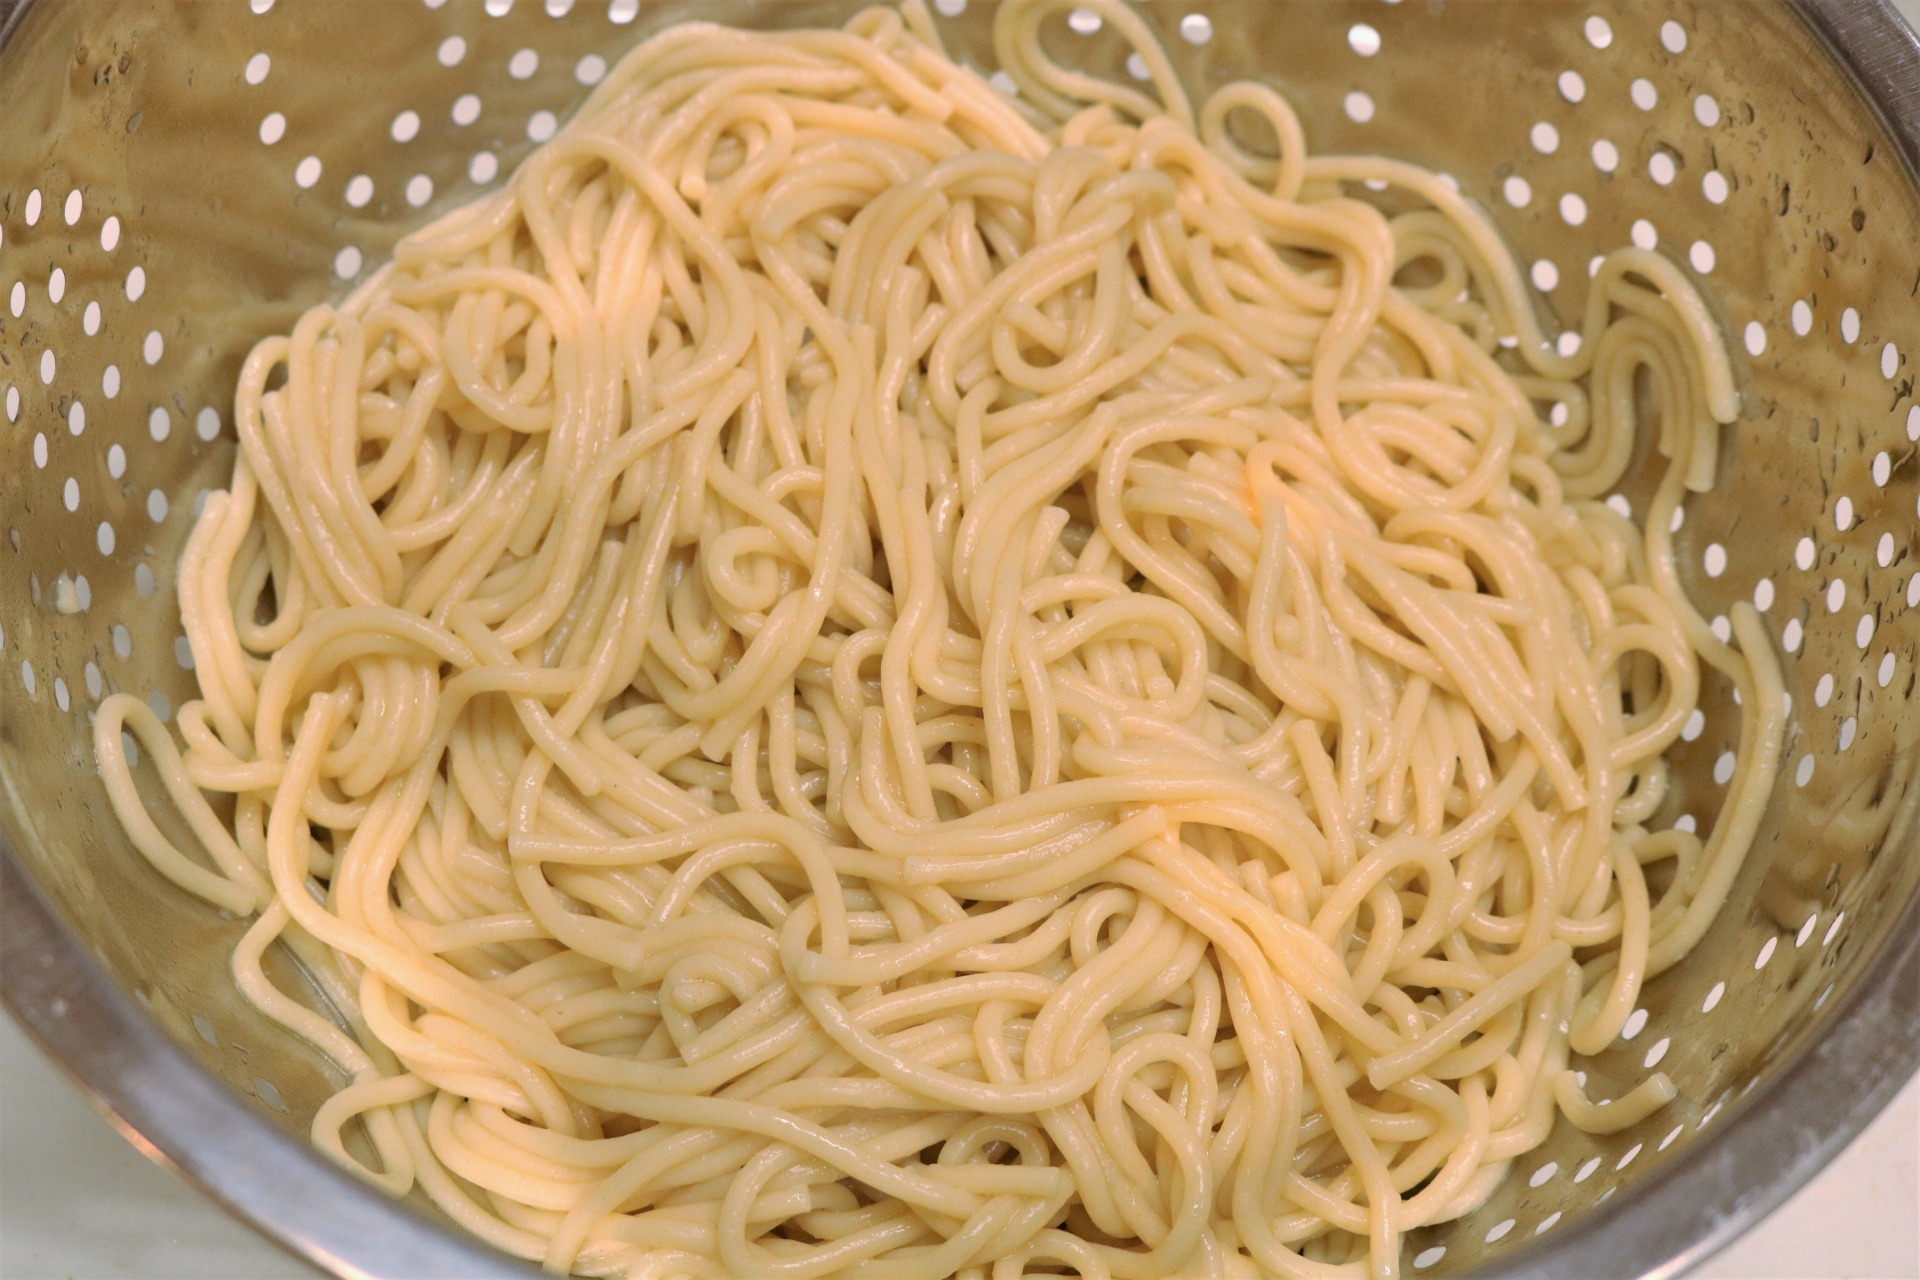 Cooked spaghetti noodles in a metal colander, close-up.